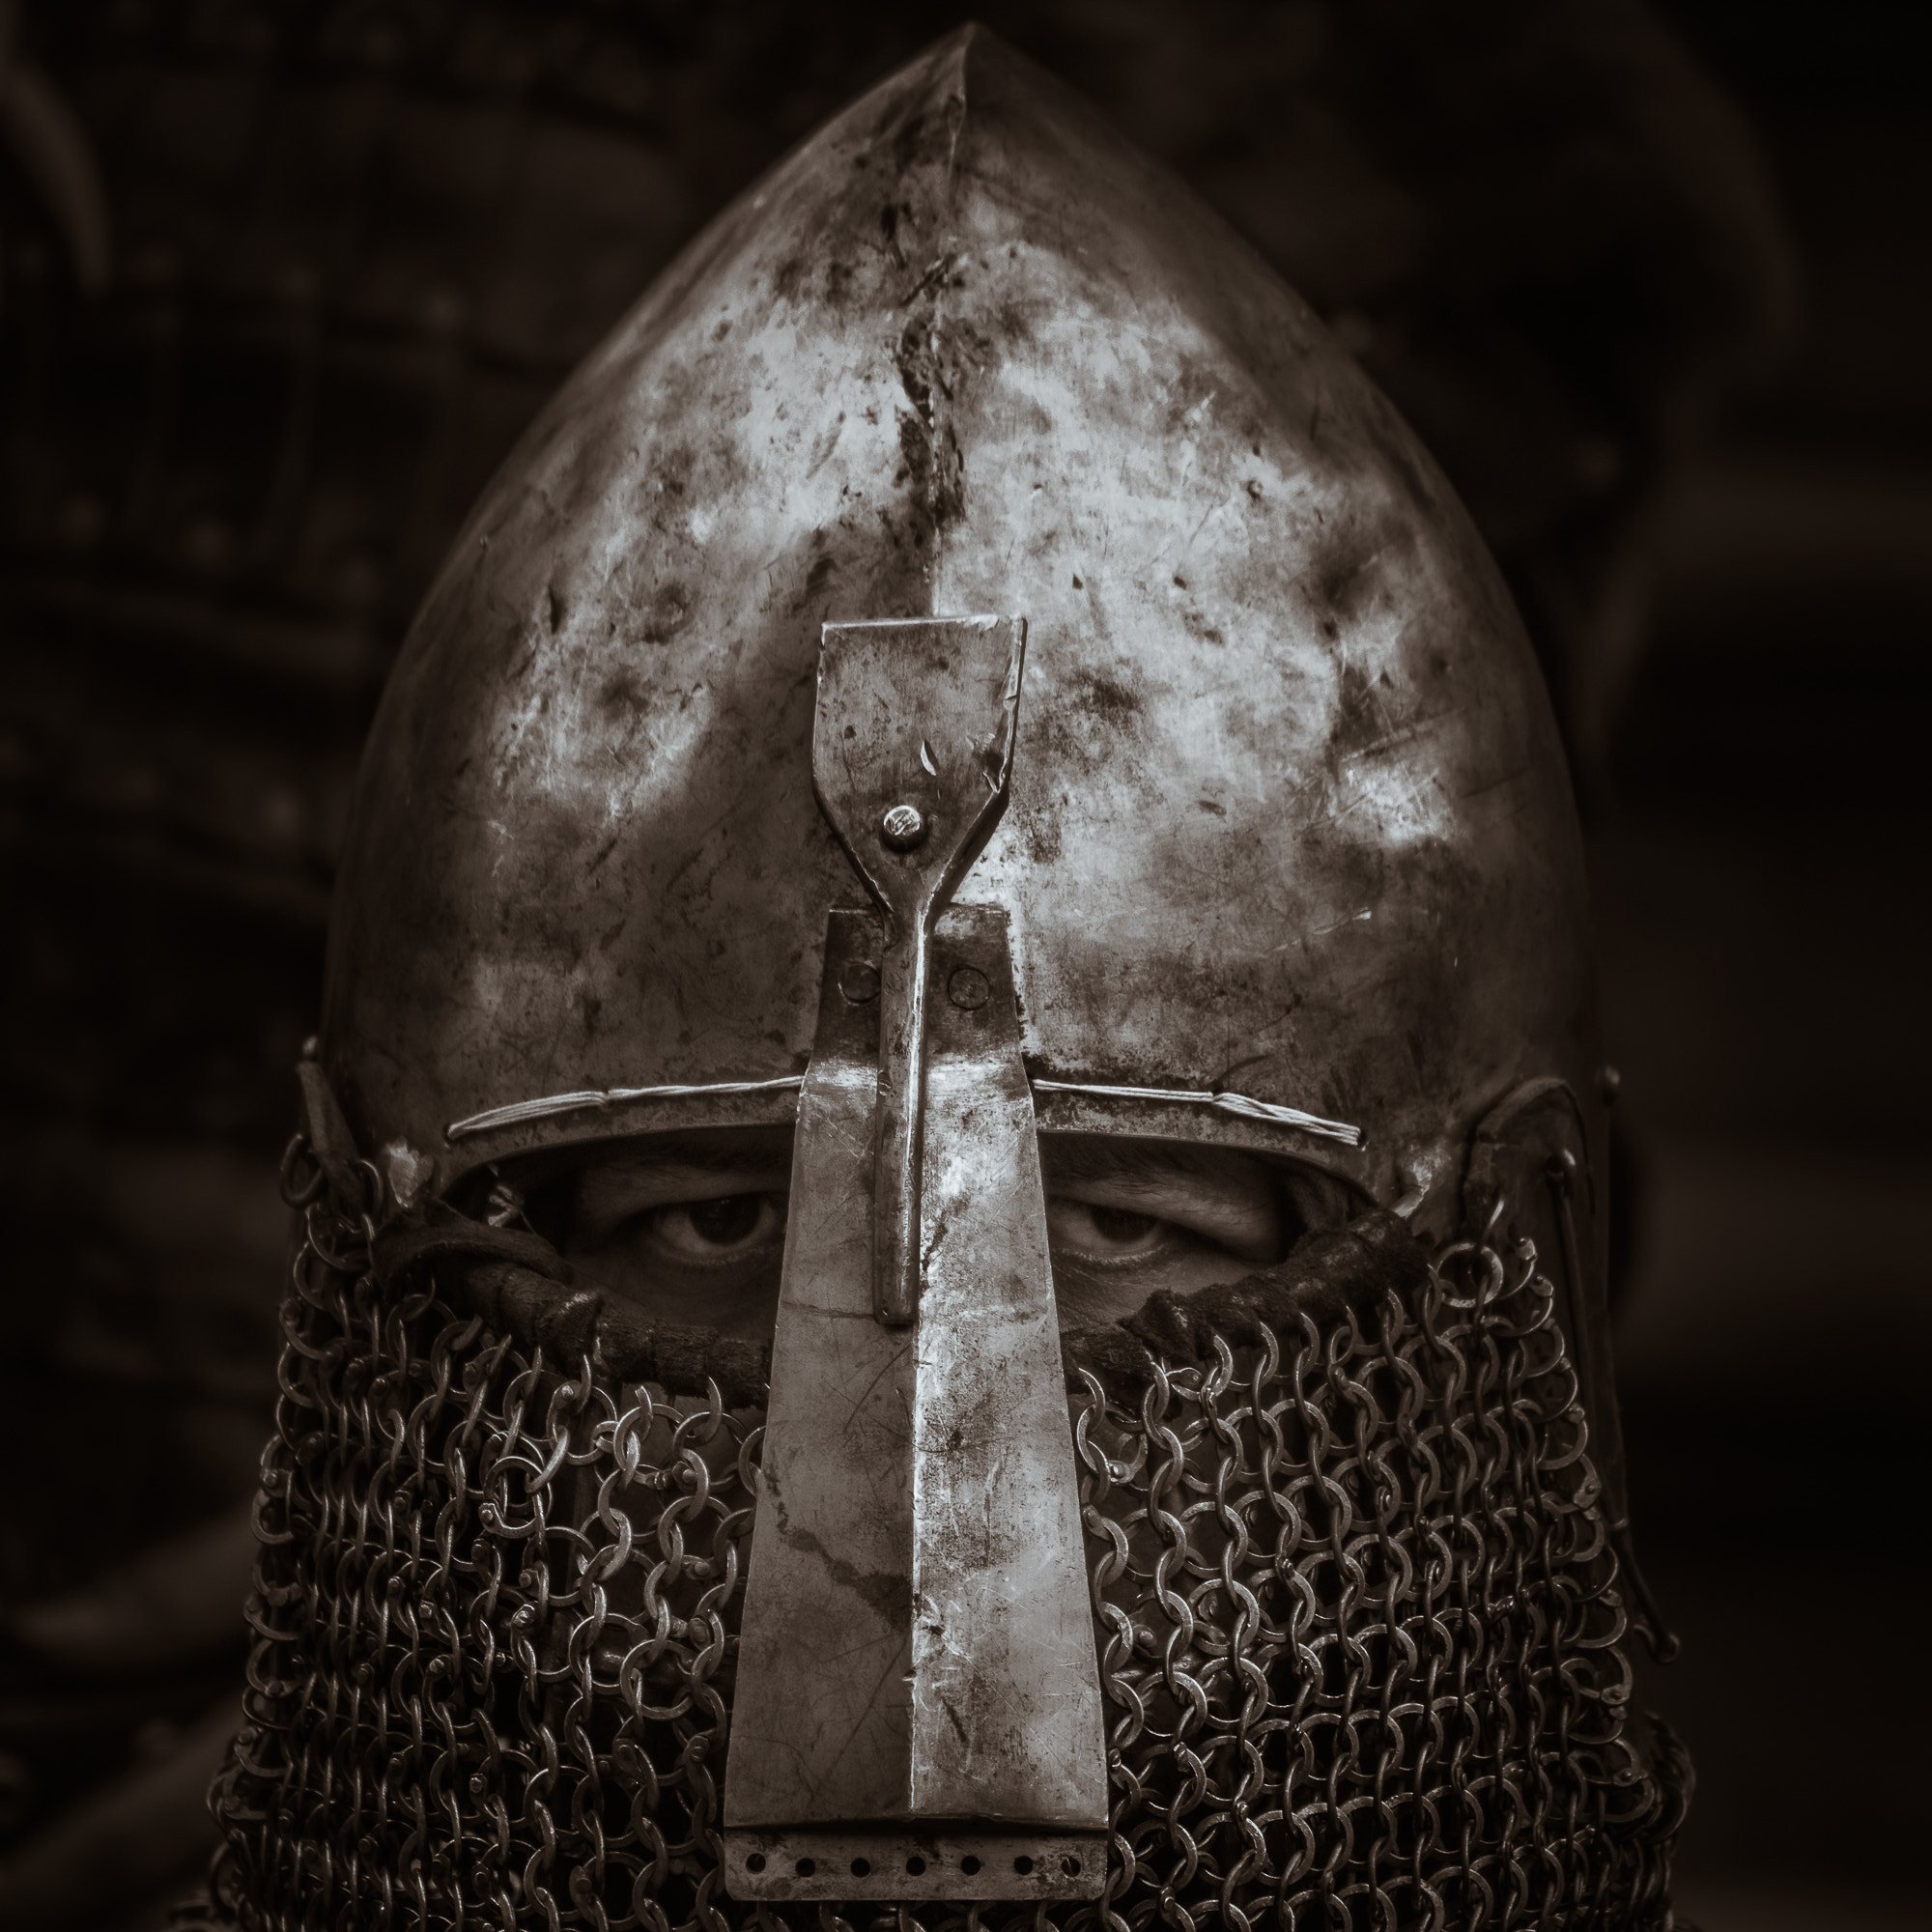 Sony ILCA-77M2 + Tamron SP 70-300mm F4-5.6 Di USD sample photo. Medieval helmet detail photography